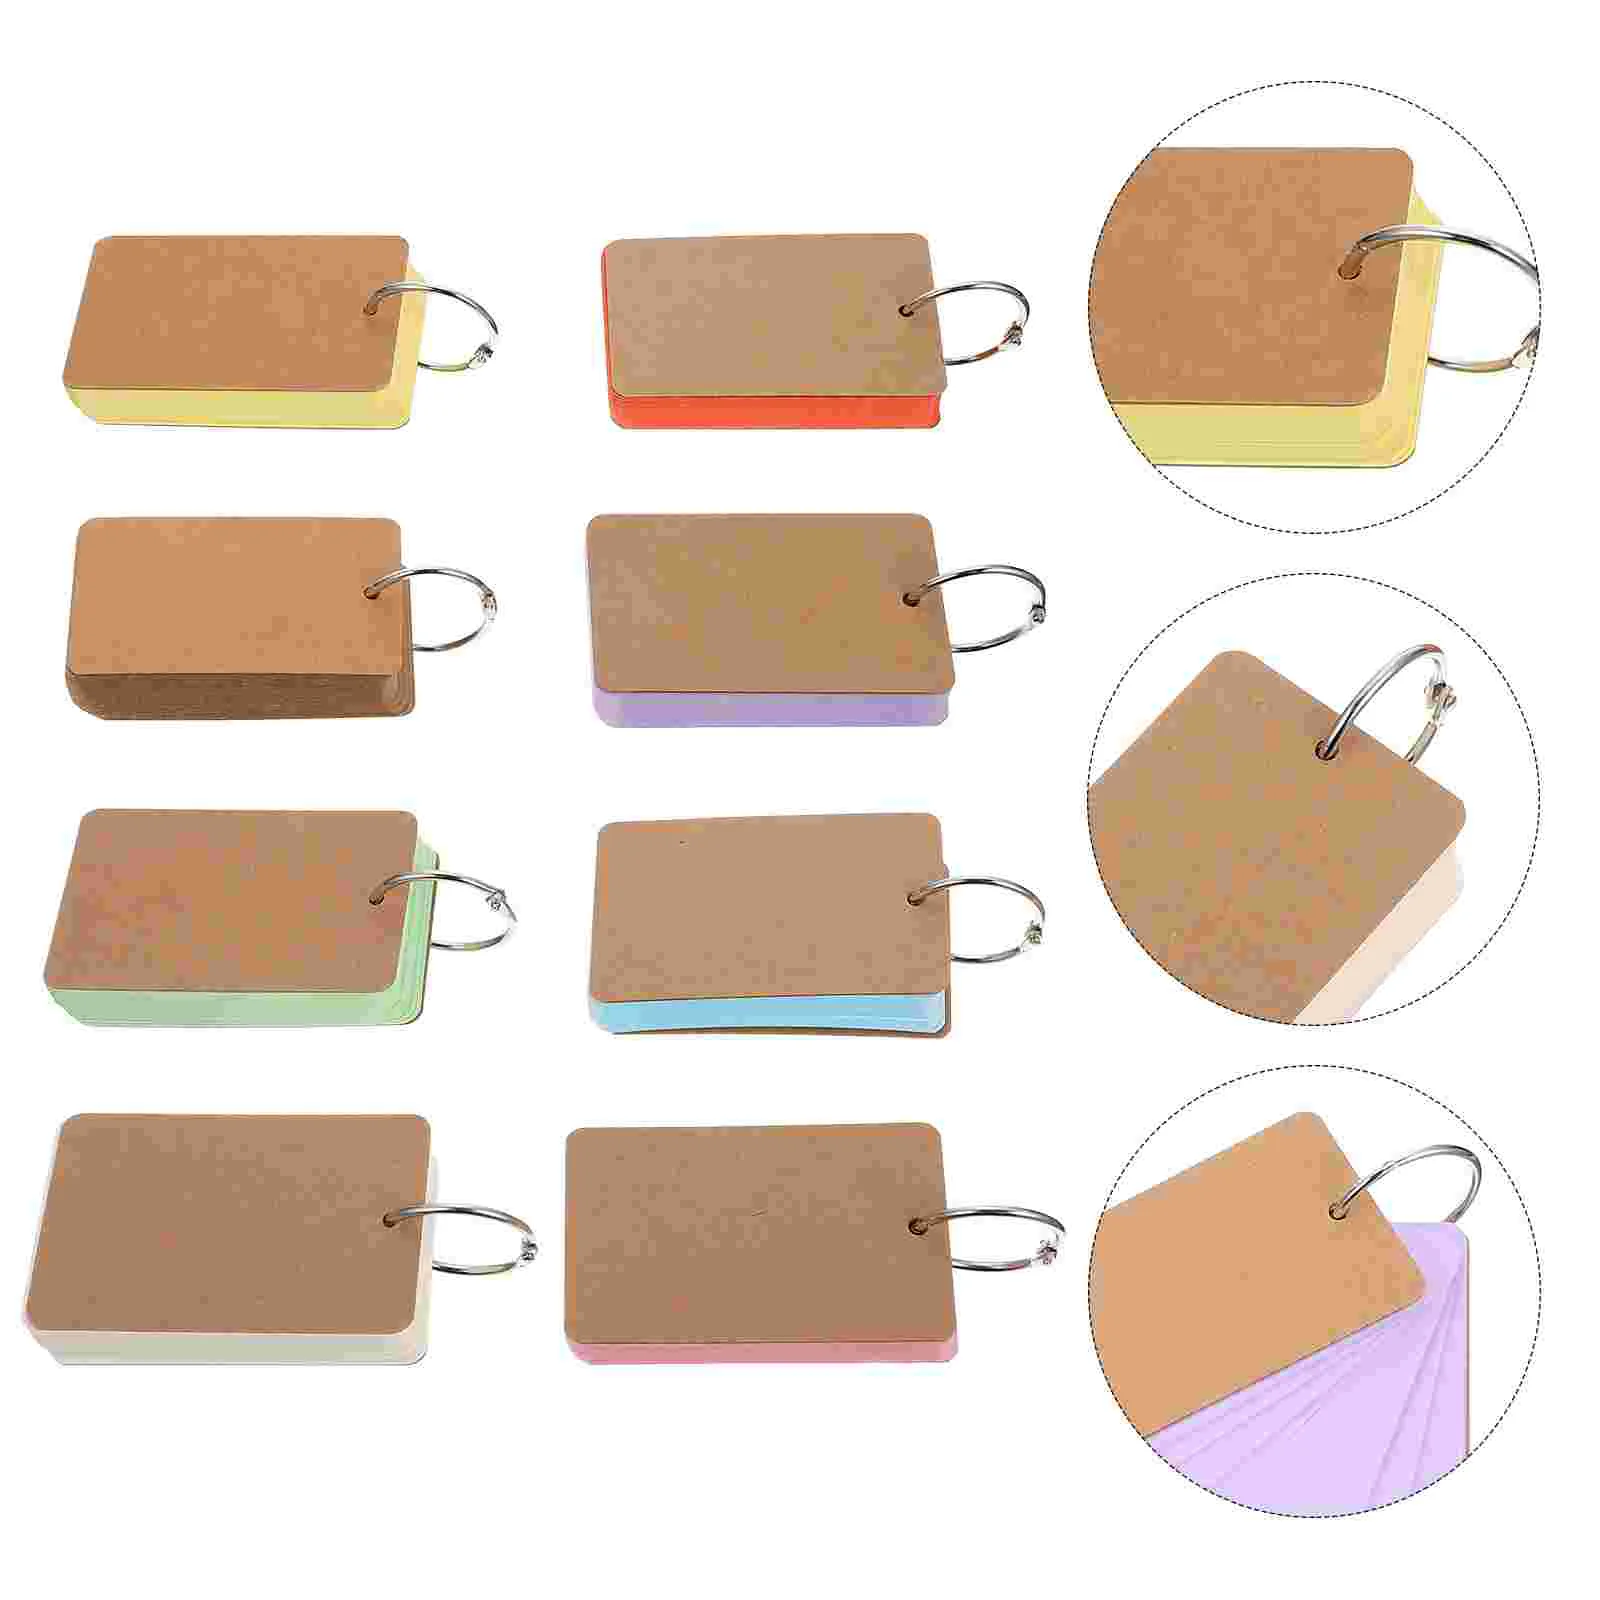 

Blank Flashcards Study Note Pad Kraft Paper with Binder Ring for Greeting Stock for School Home Office Use 8 Books